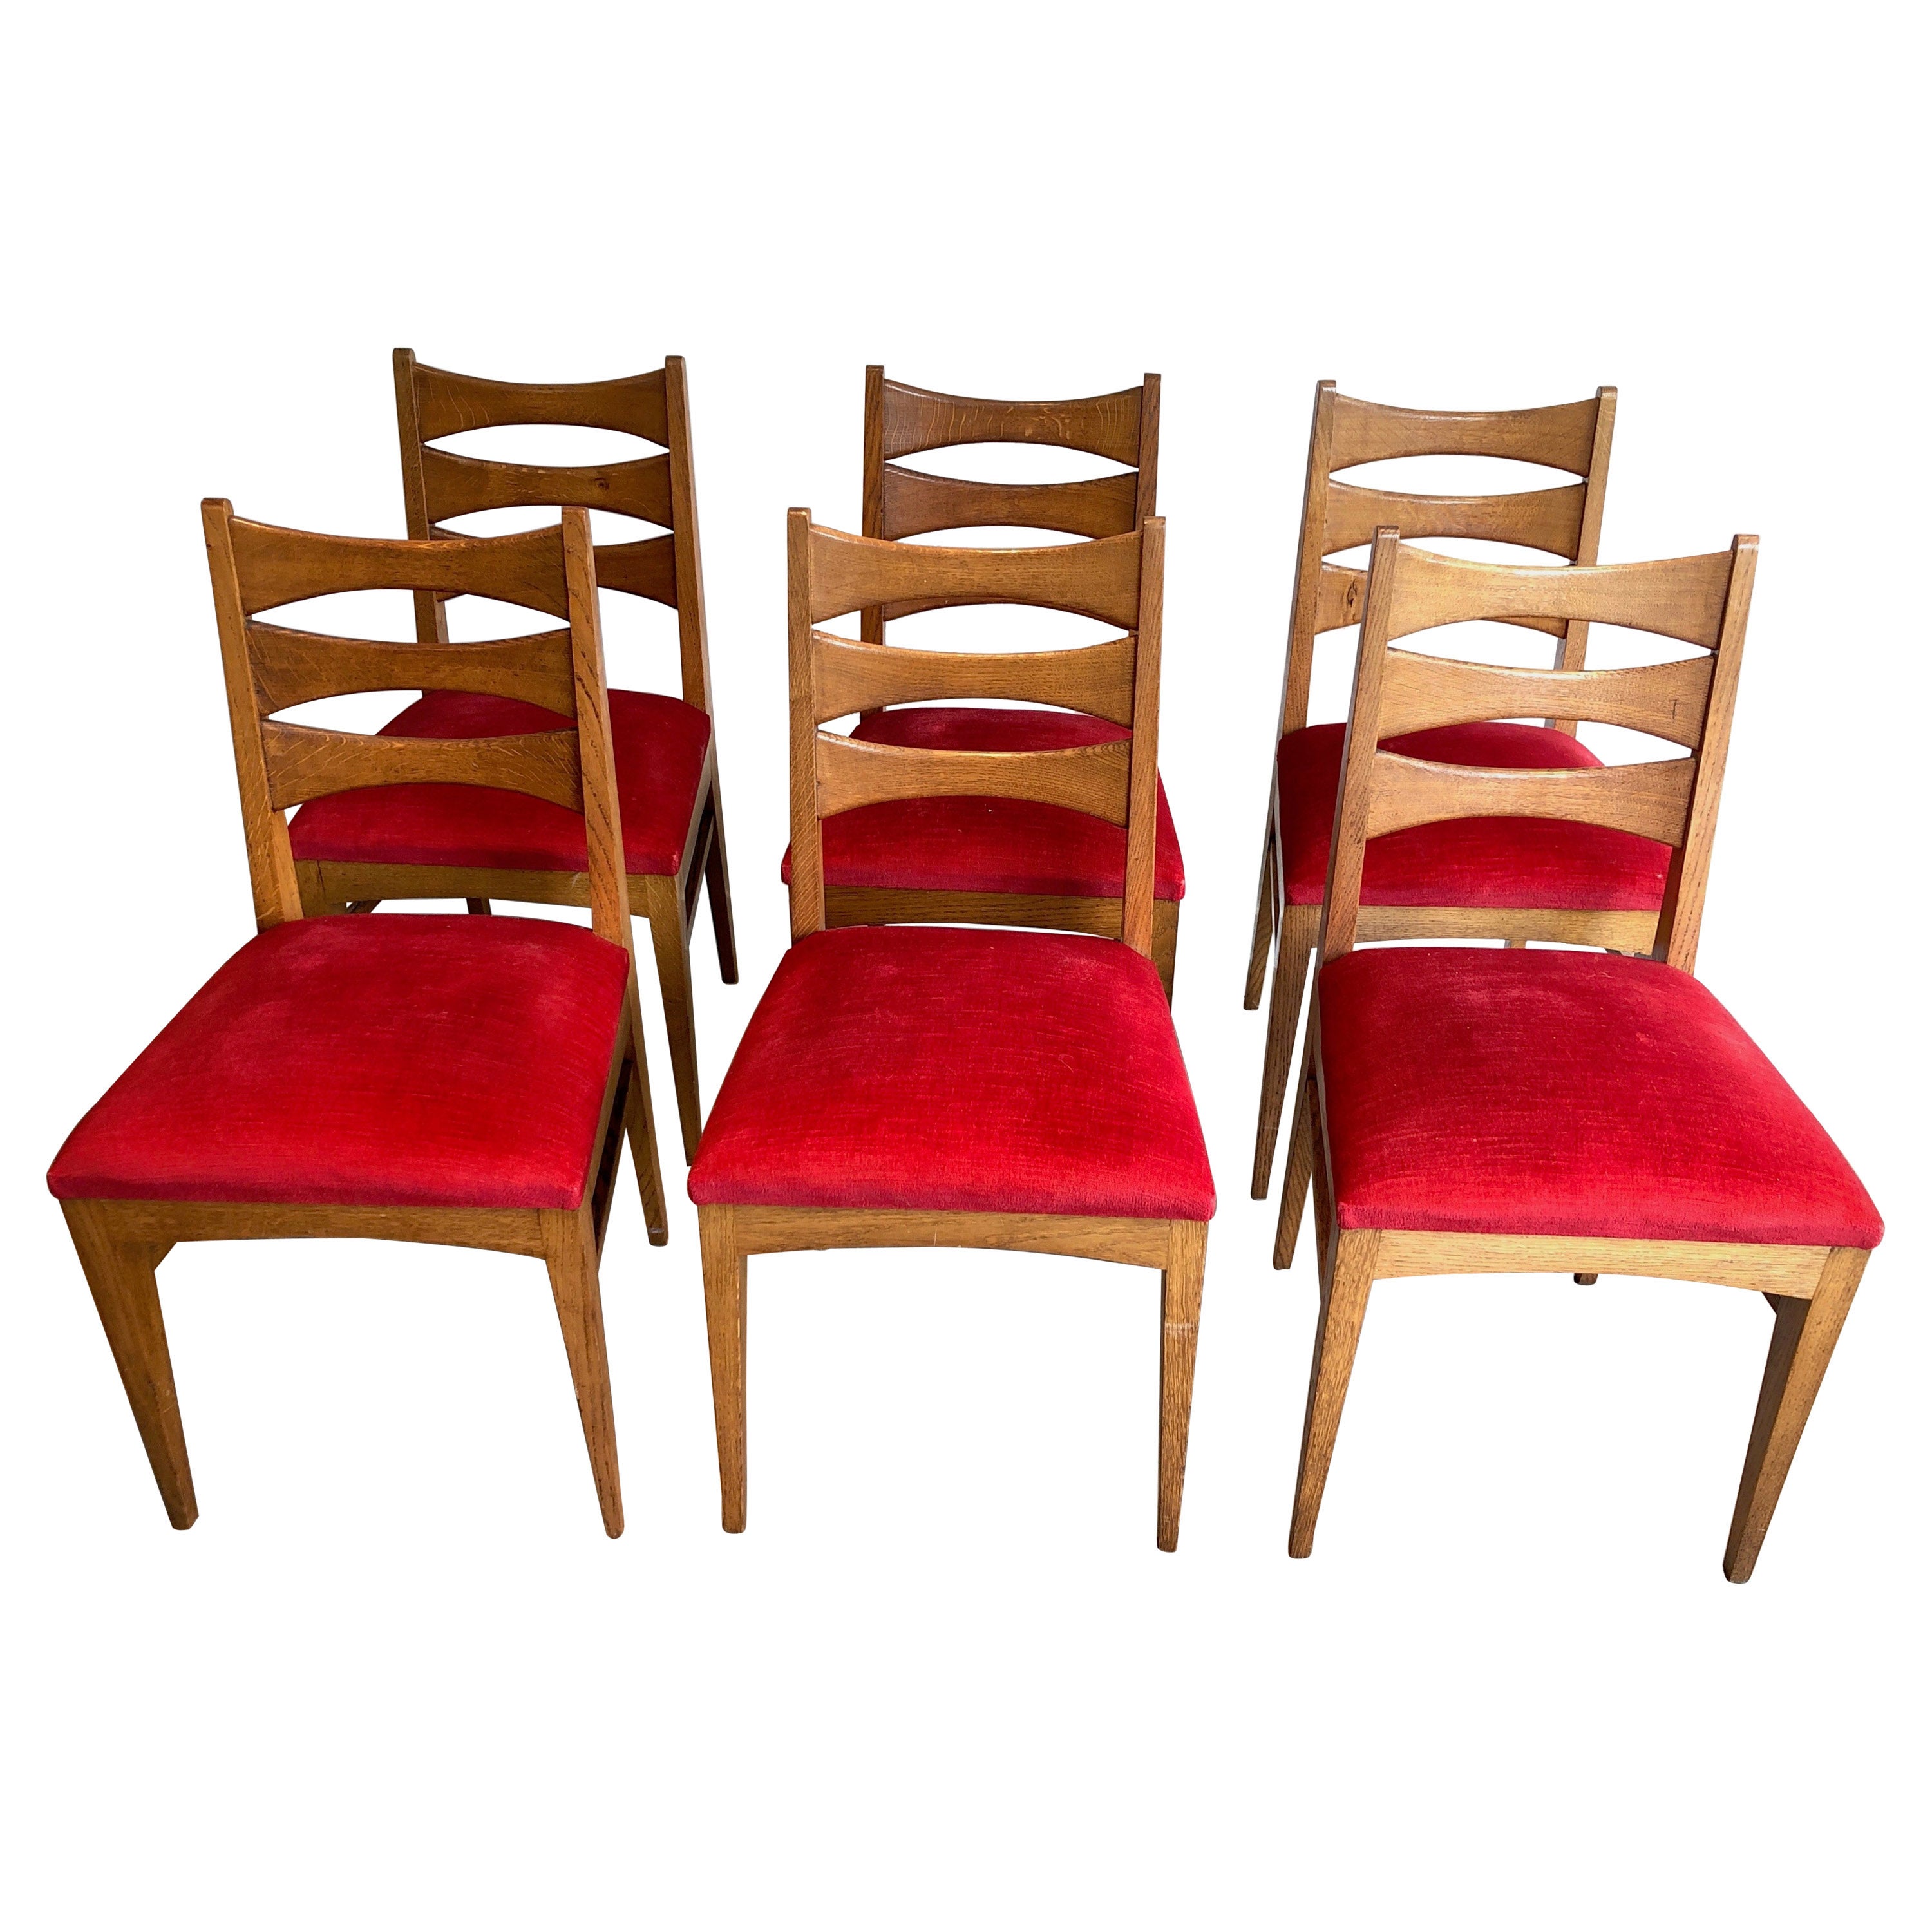 Set of 6 Oak and Red Velvet Chairs. French Work, Circa 1950